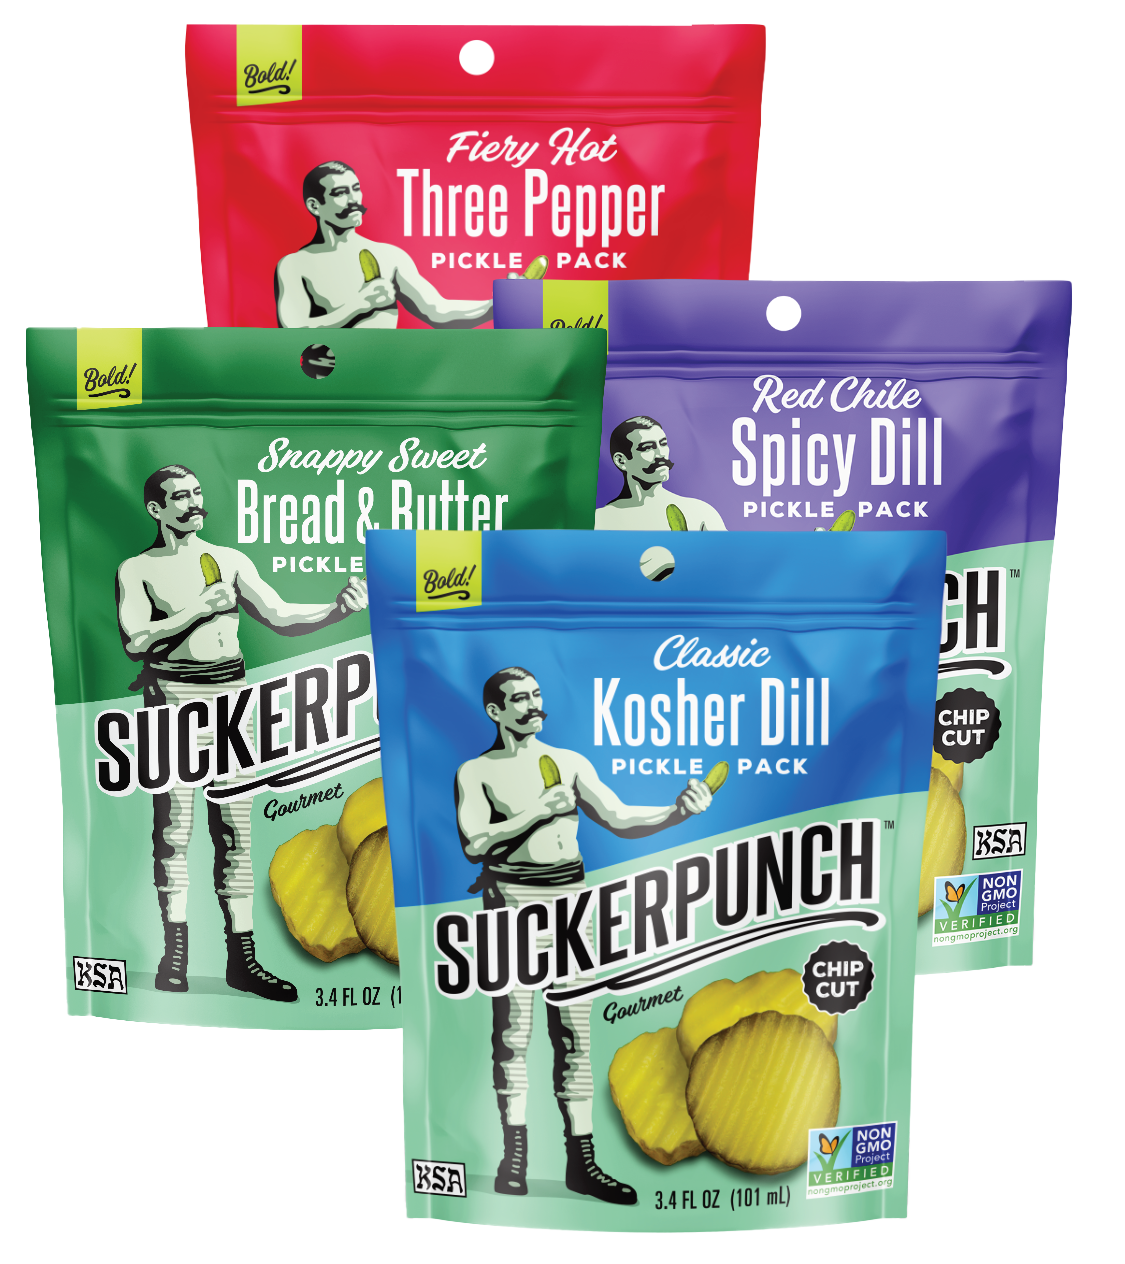 3 Pickles Variety Pack – Shipping Included – The Pickle Guys